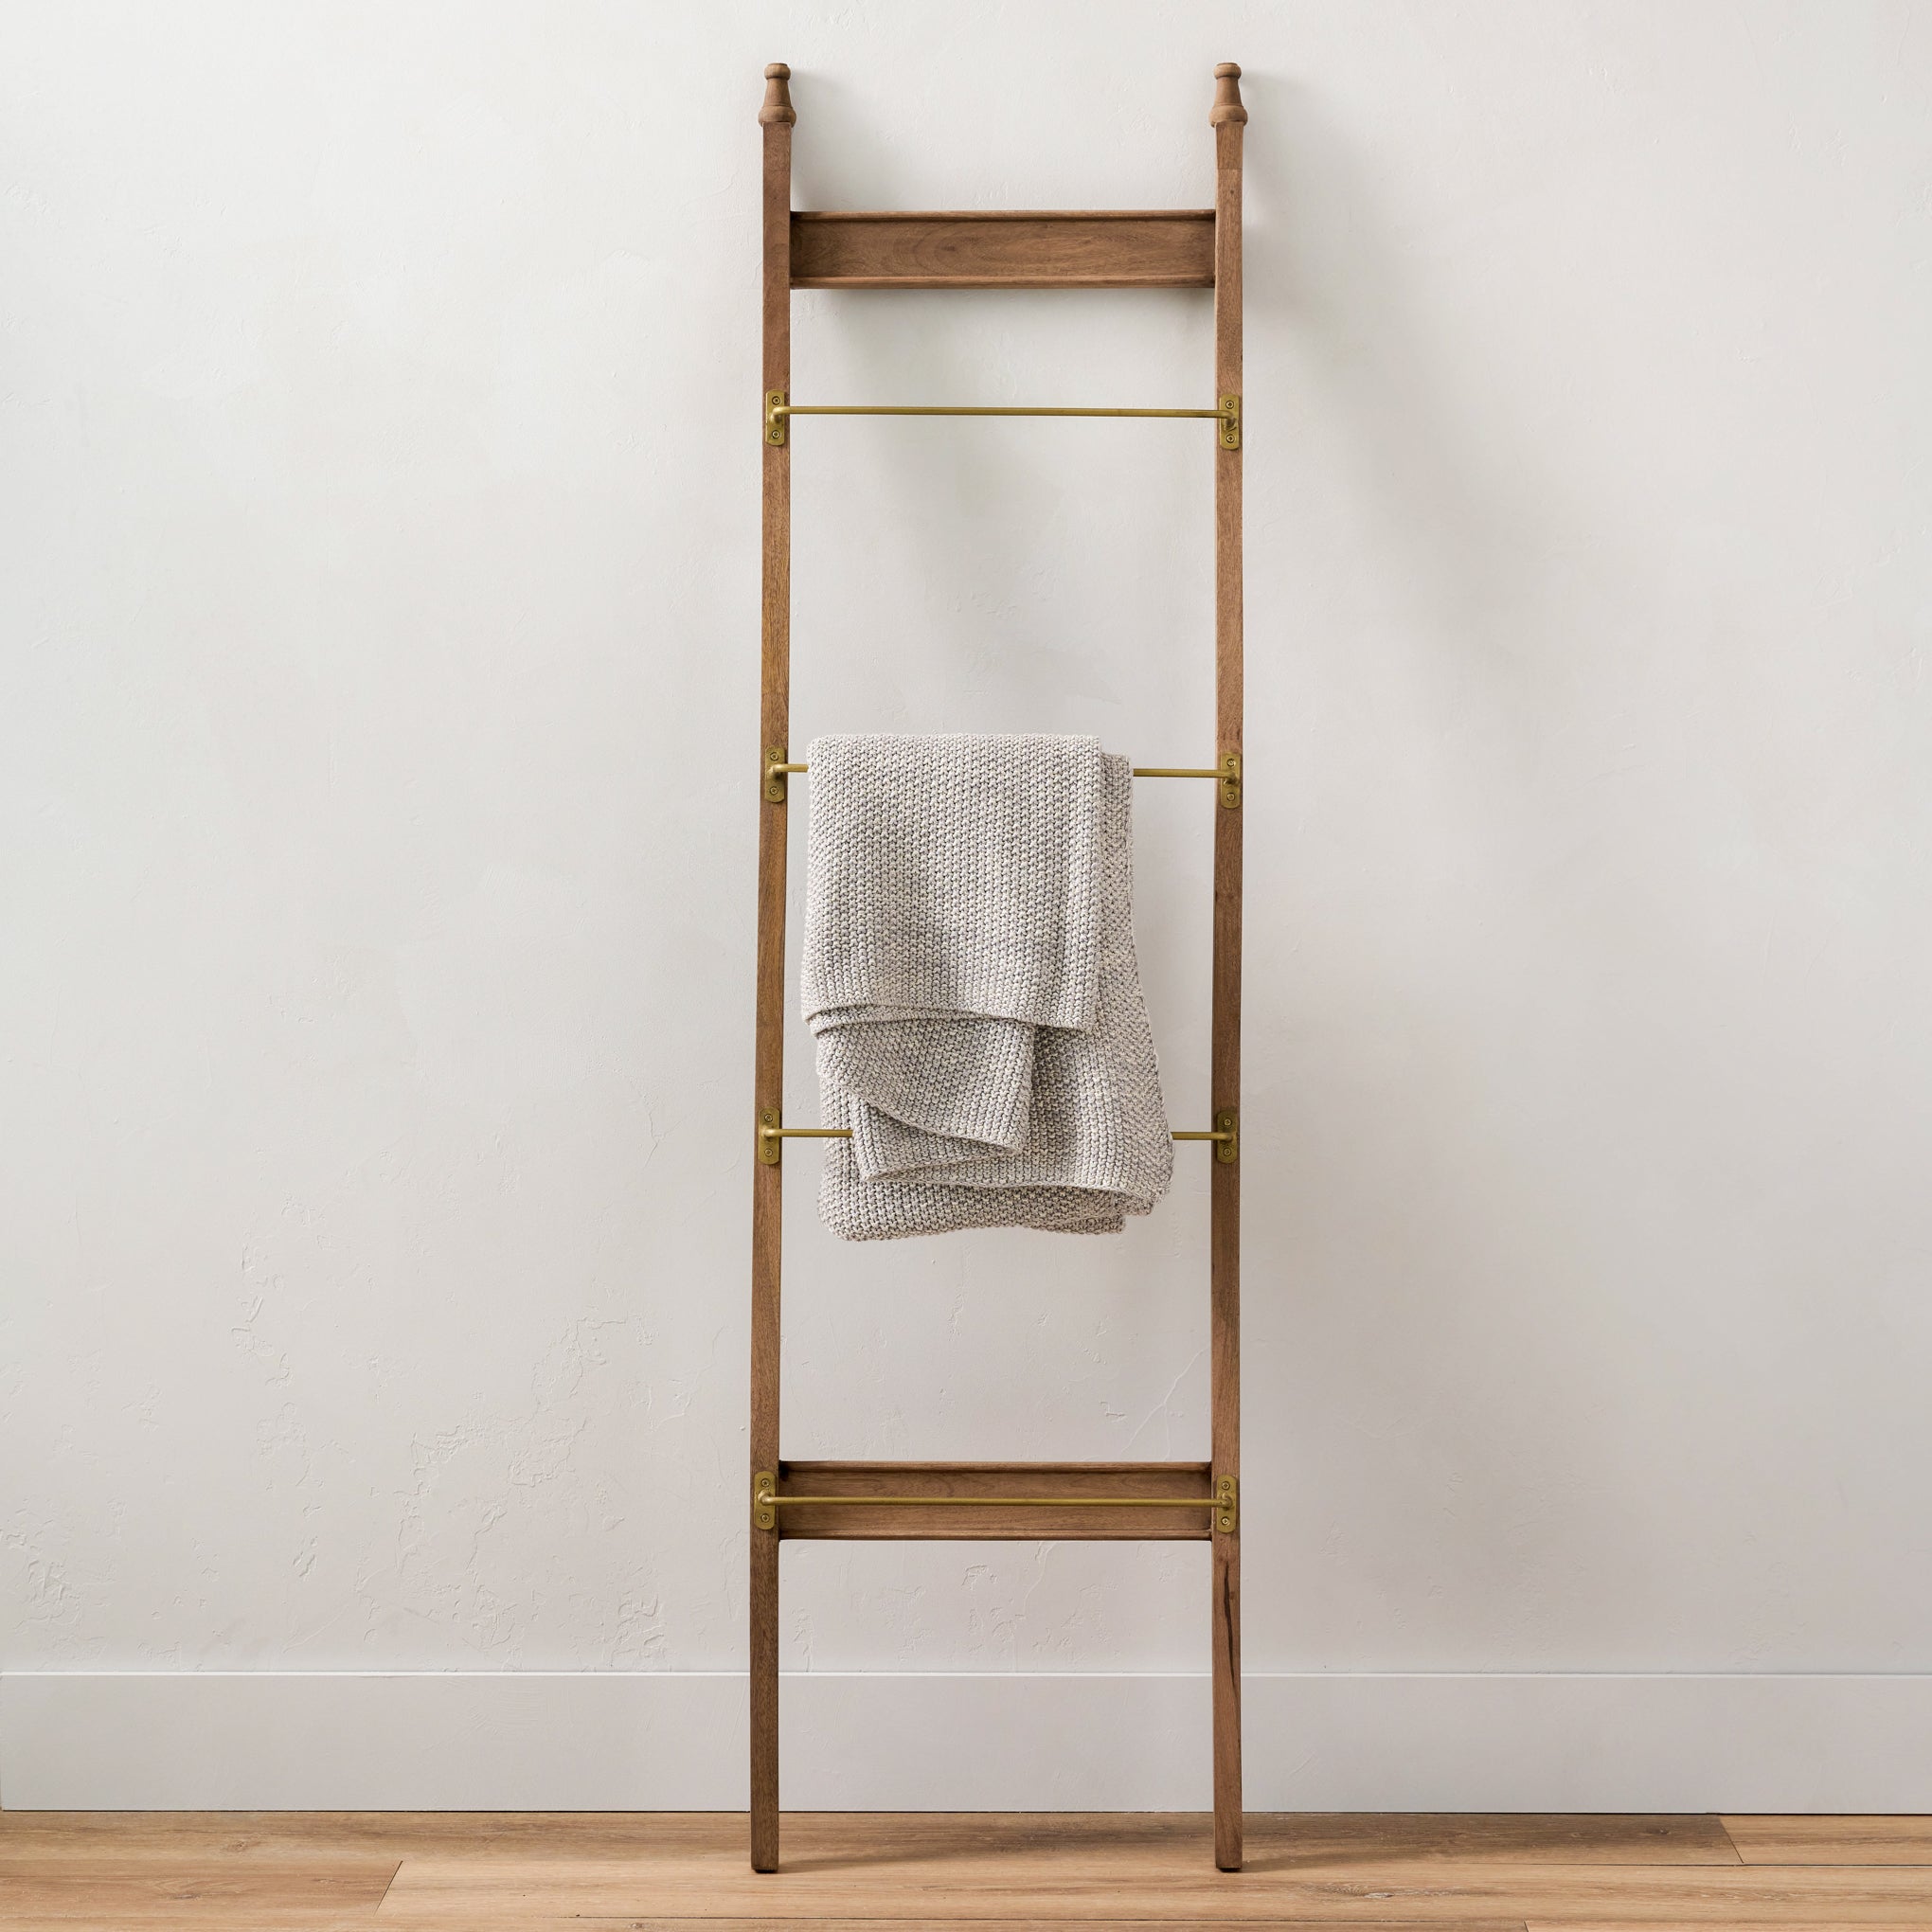 Brass and Wood Library Ladder with blanket hanging